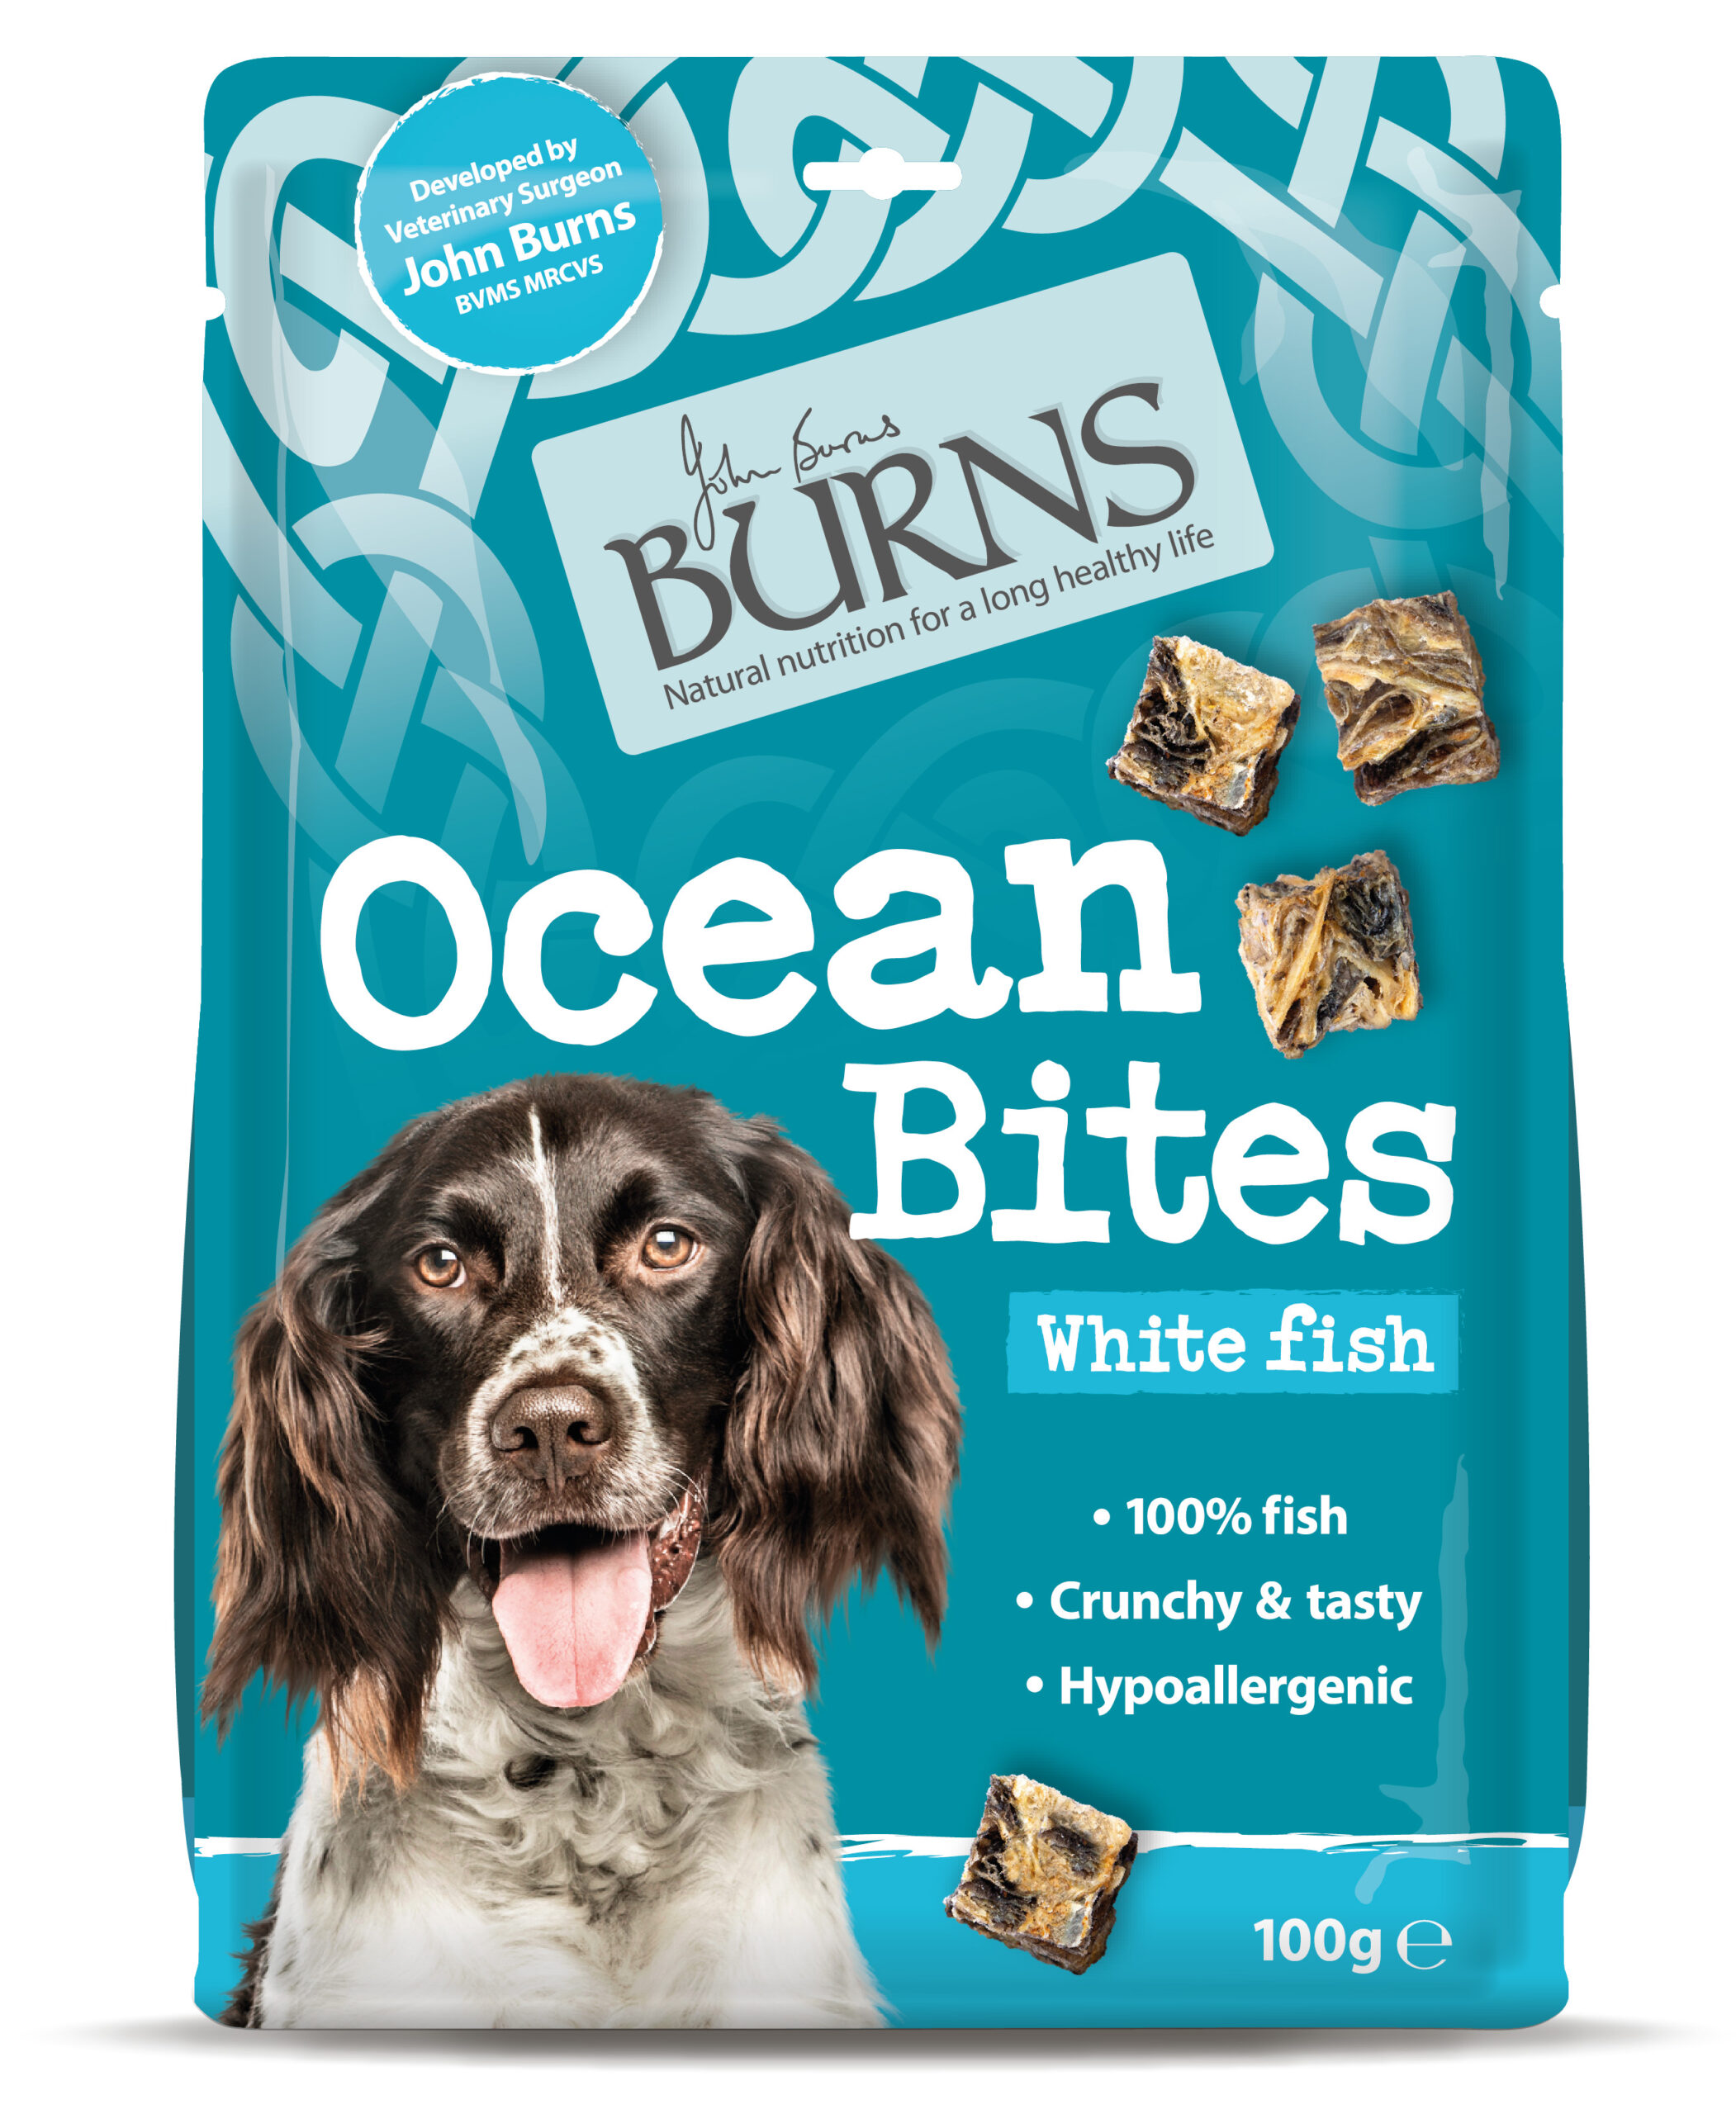 Suppliers of Ocean Bites With White Fish